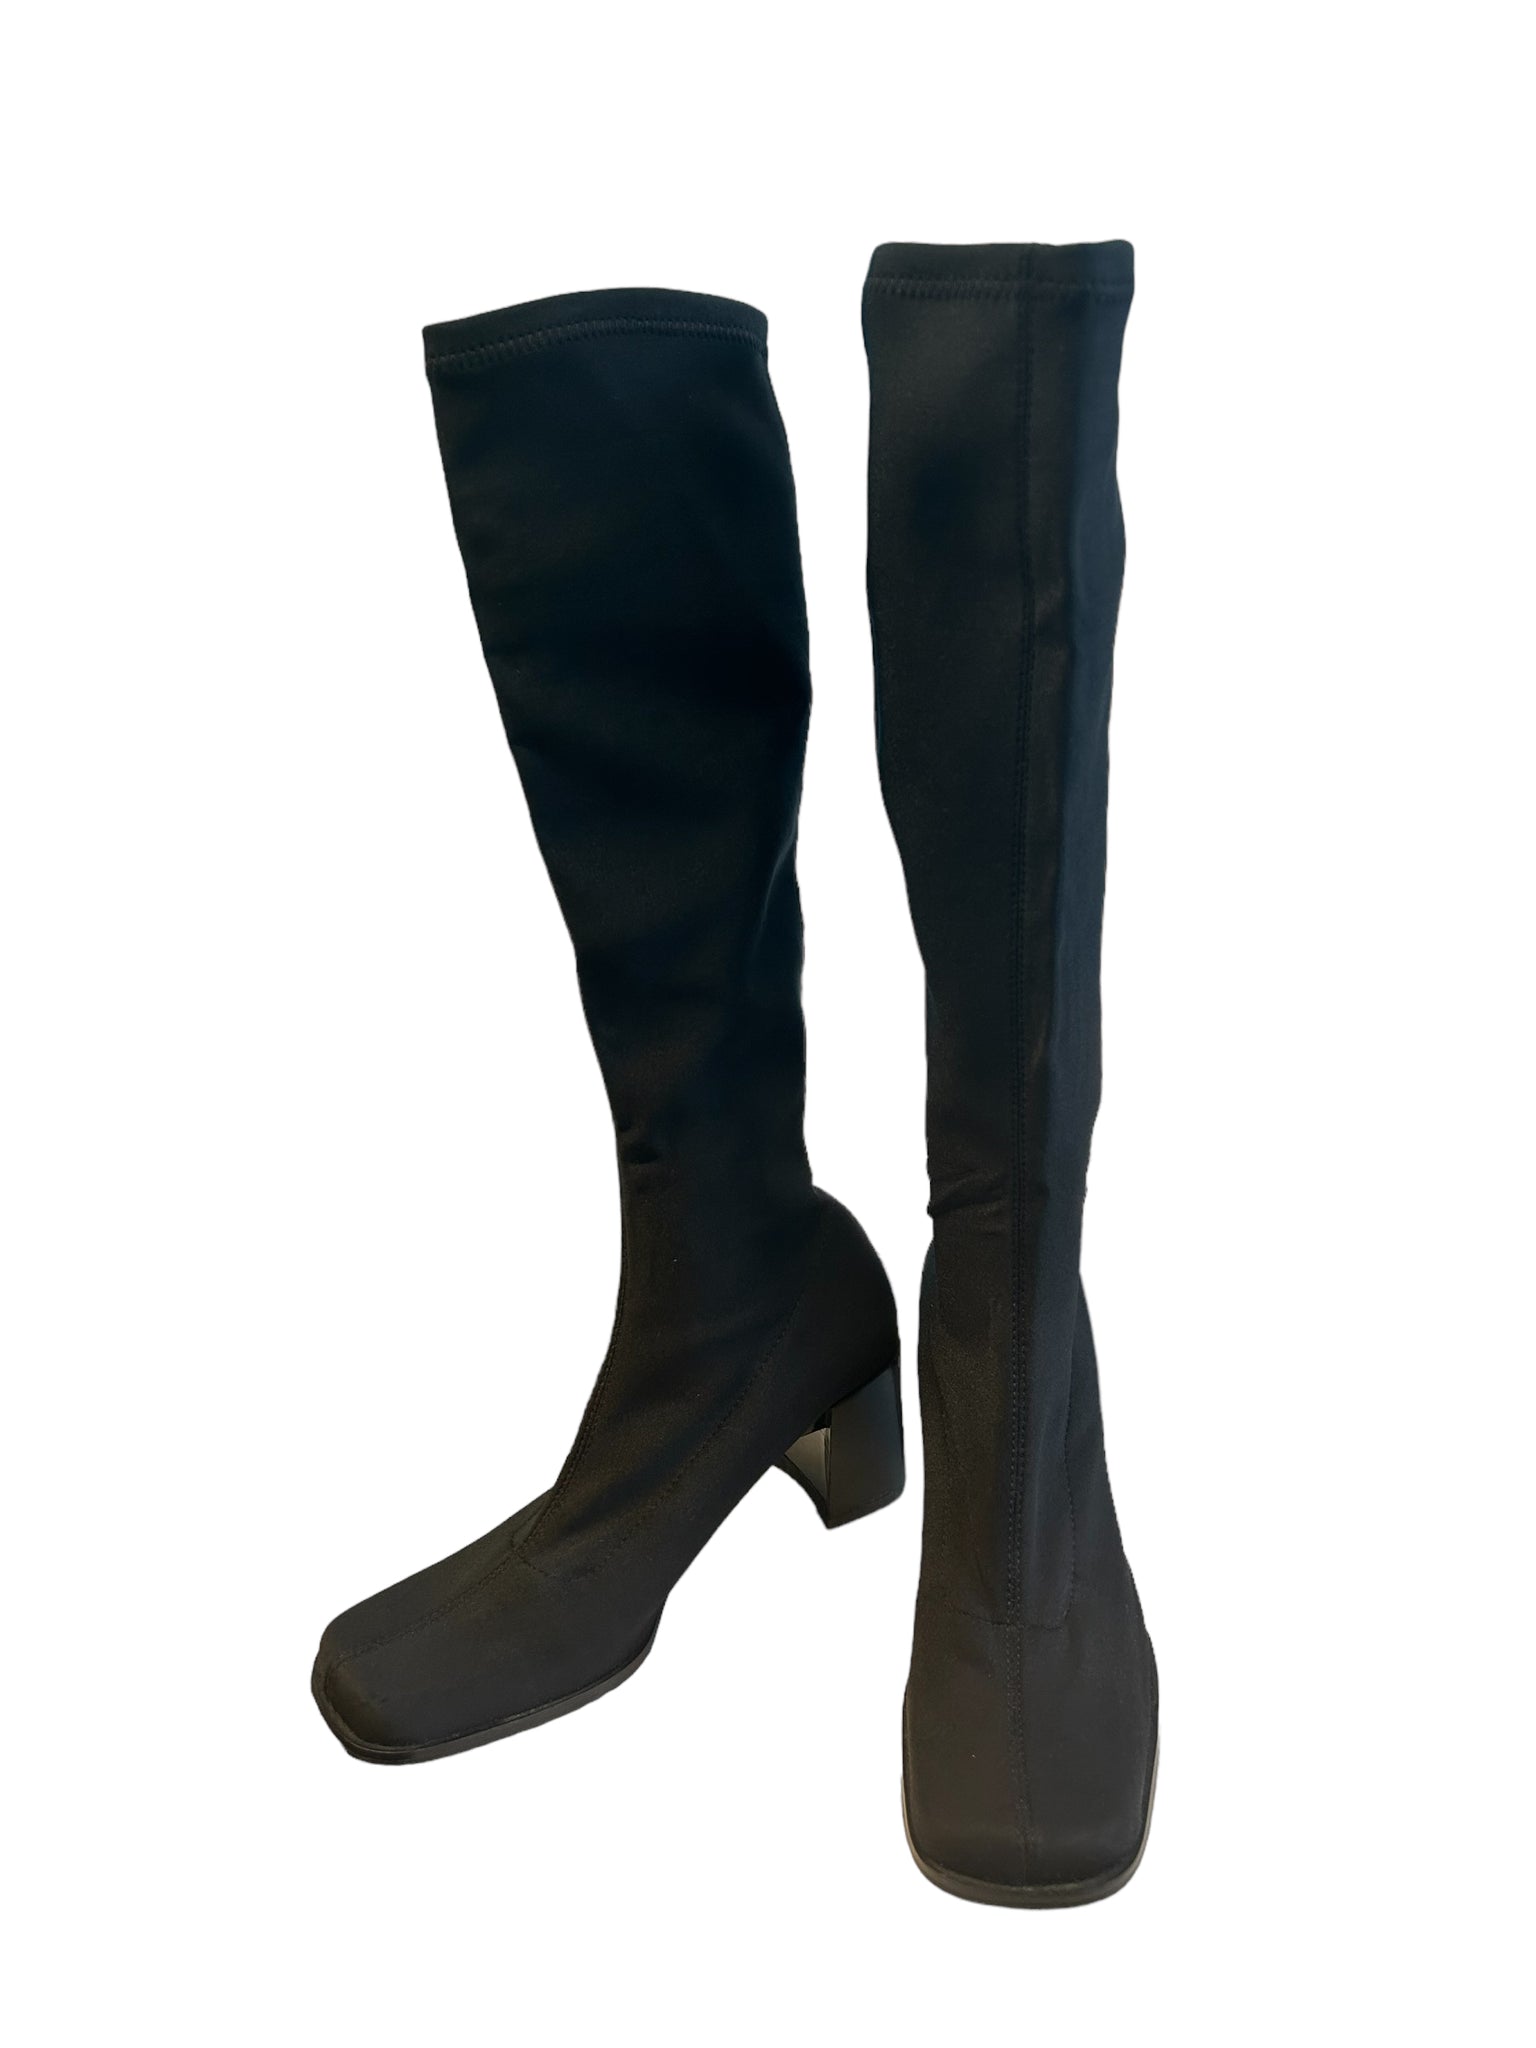 Black Fitted Knee High boots